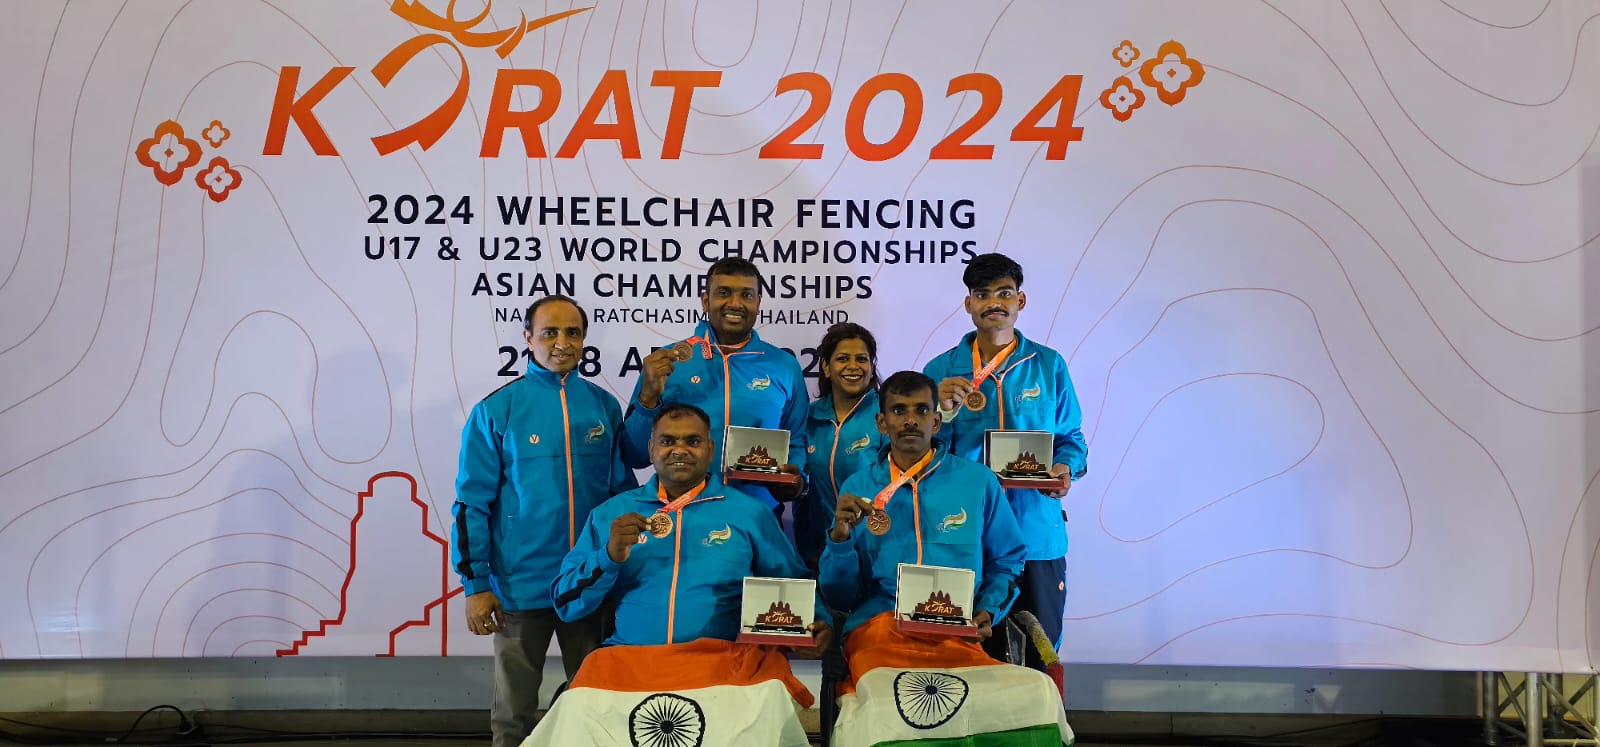 Congratulations to Fencers winning Medals the WheelchairFencing Championship 2024 in Thailand